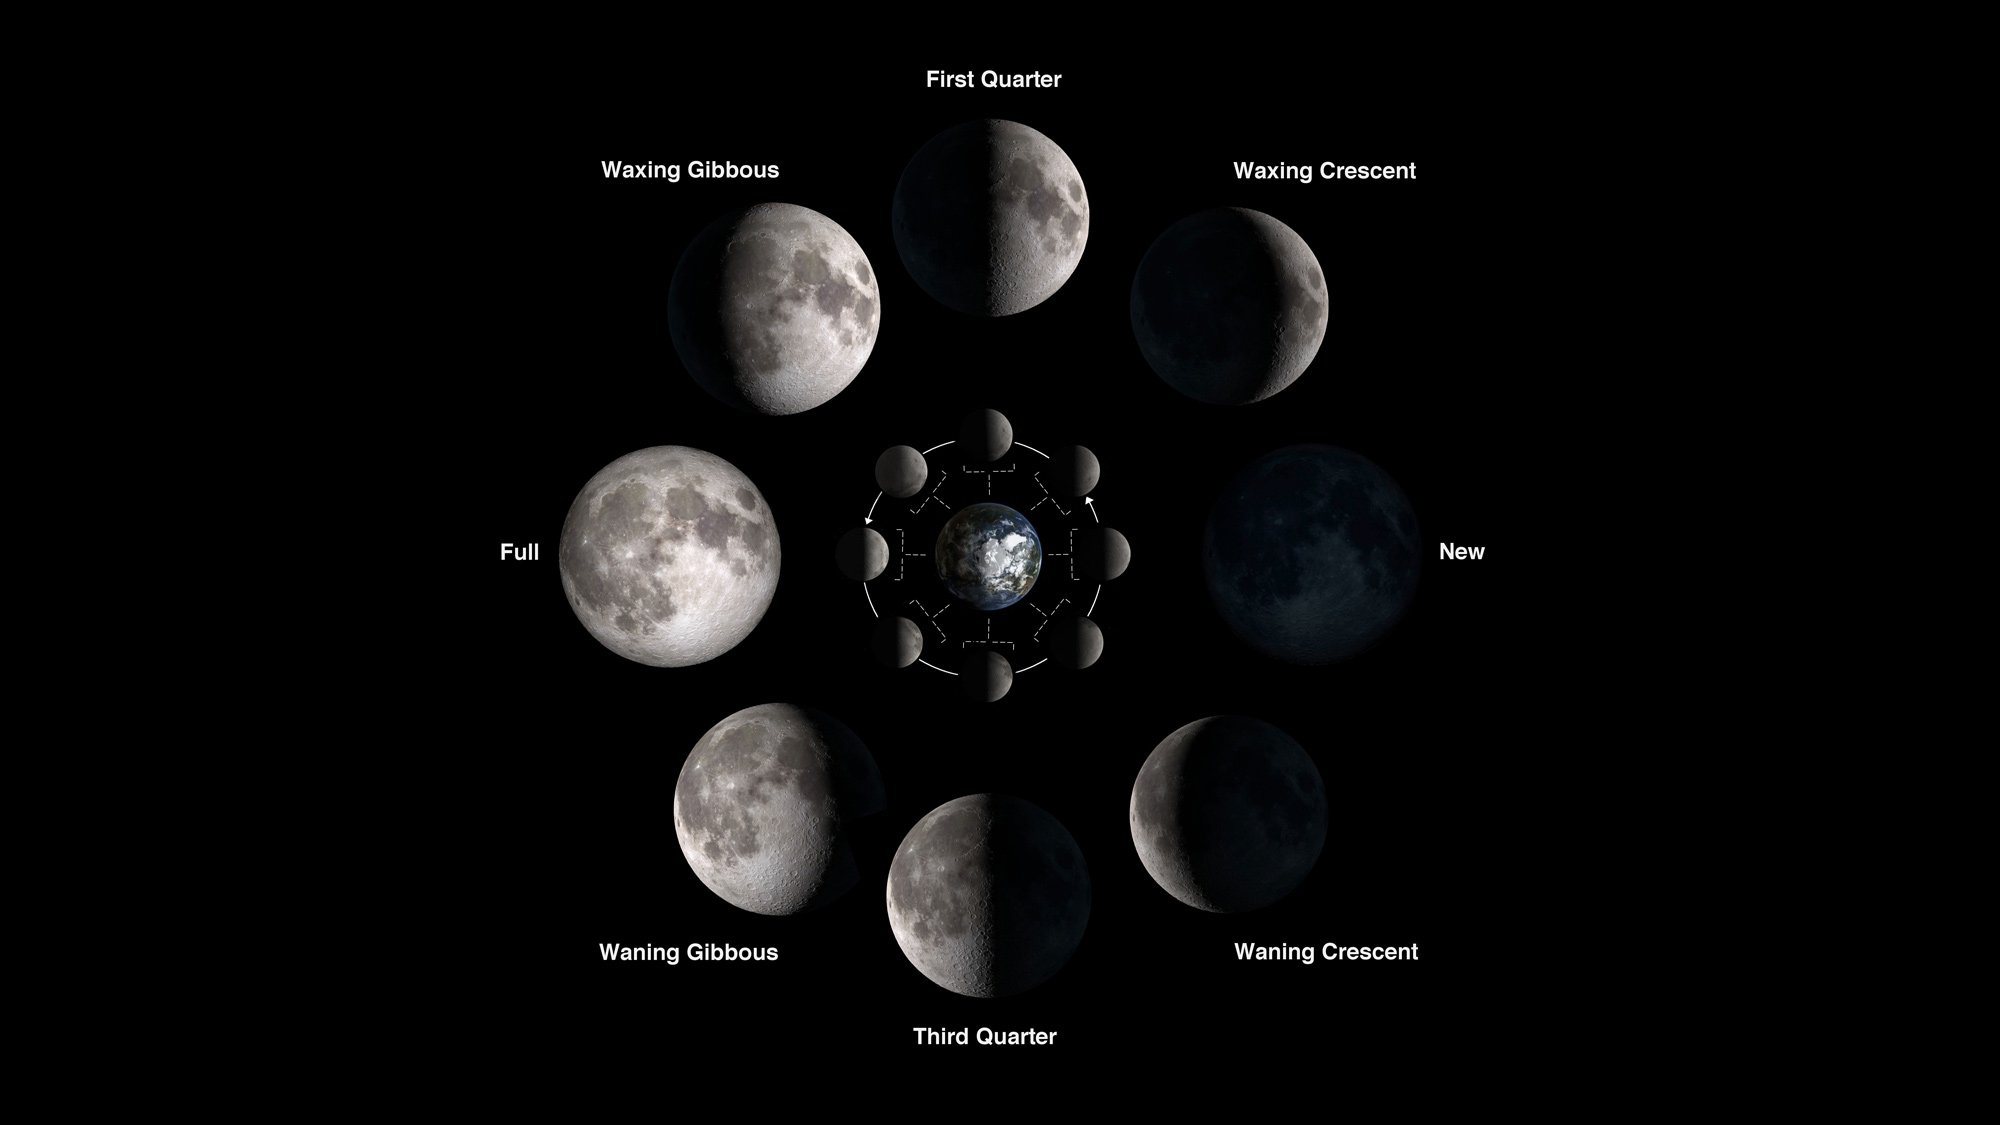 This graphic shows the phases of the moon and the orientation of the moon, Earth and sun during each phase.